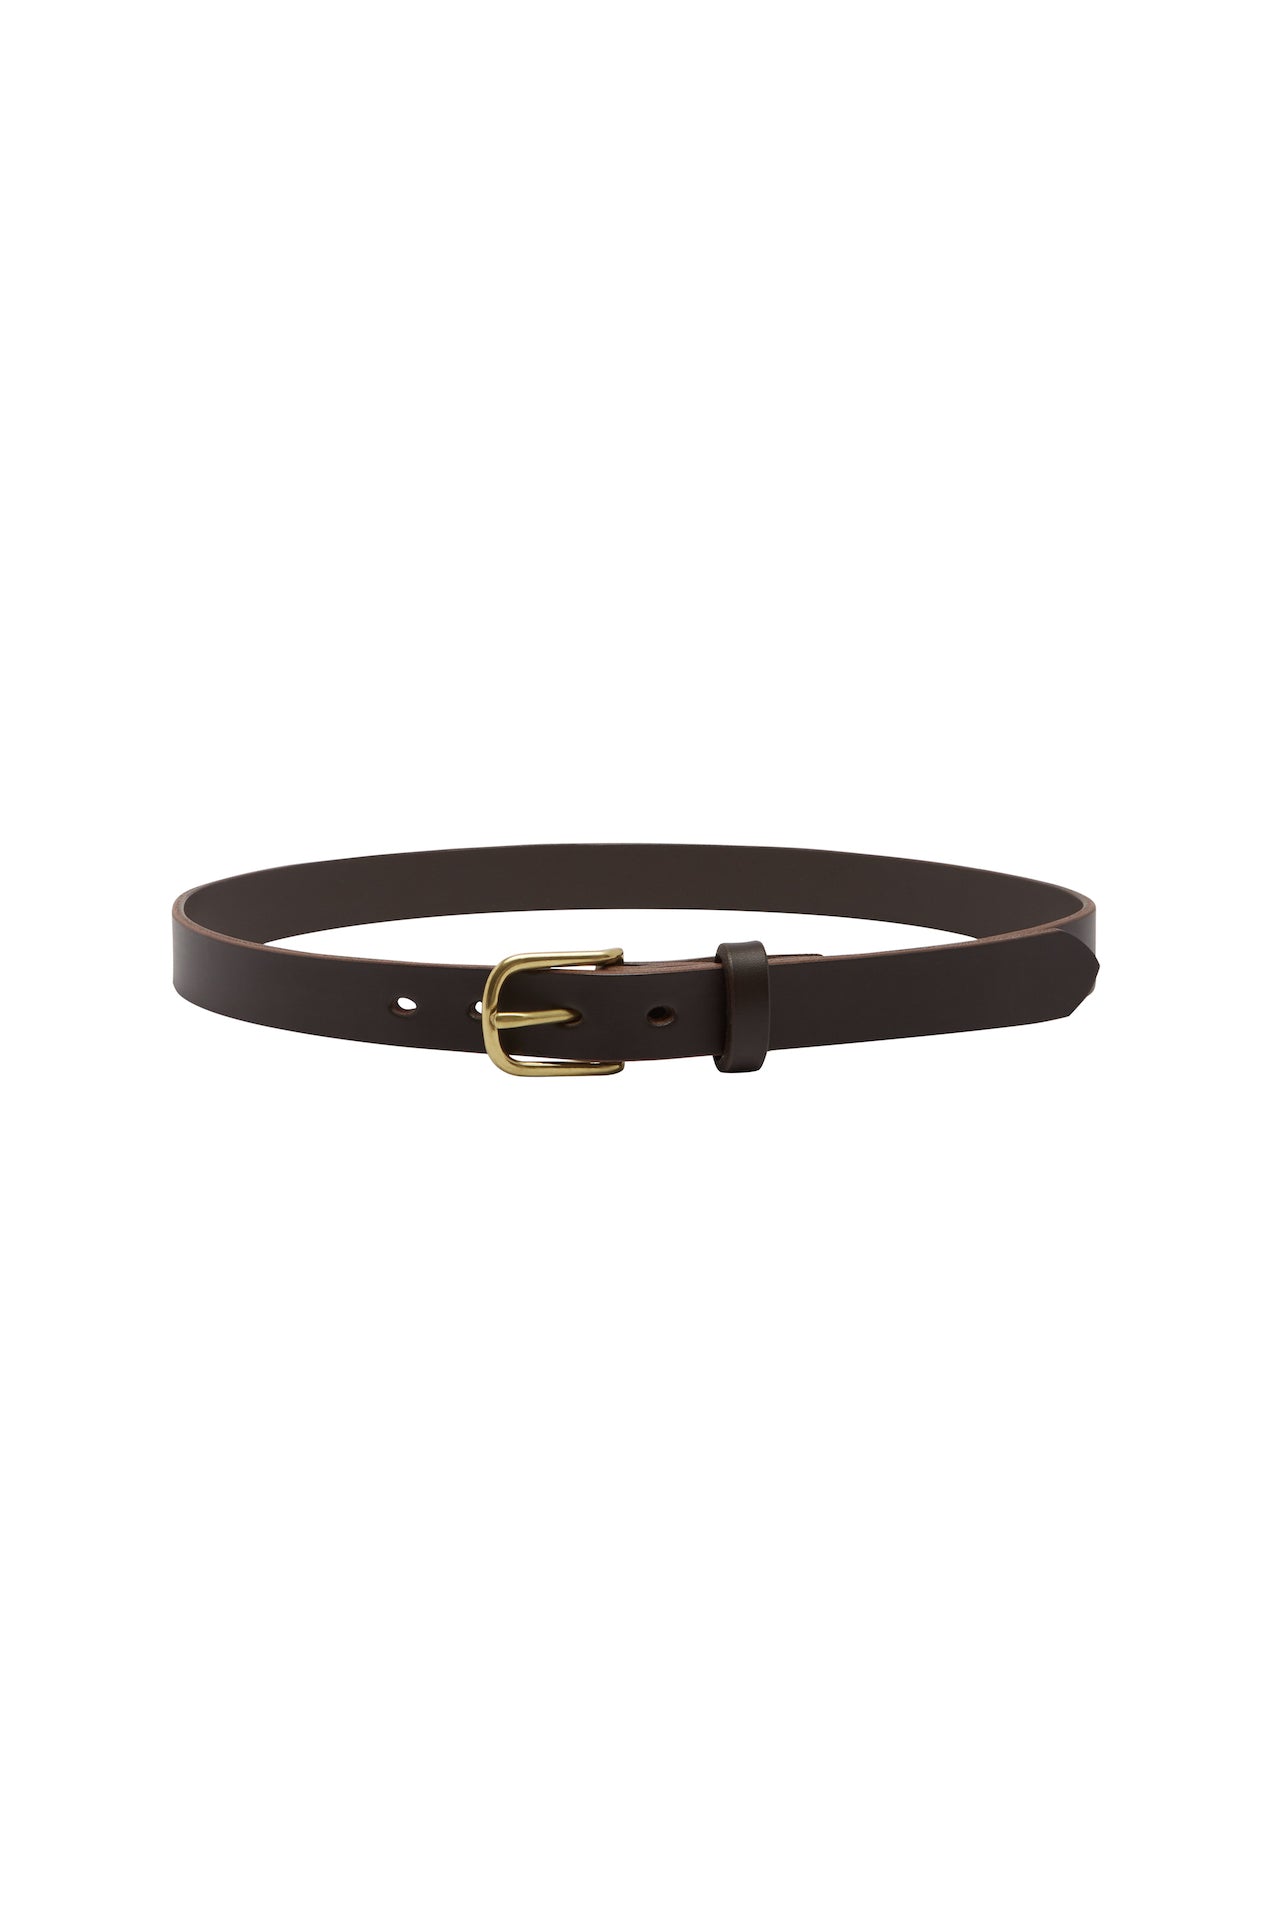 SAINT classic leather belt in brown leather with solid brass buckle. made in Australia using traditional leather smith techniques. 100% Italian leather